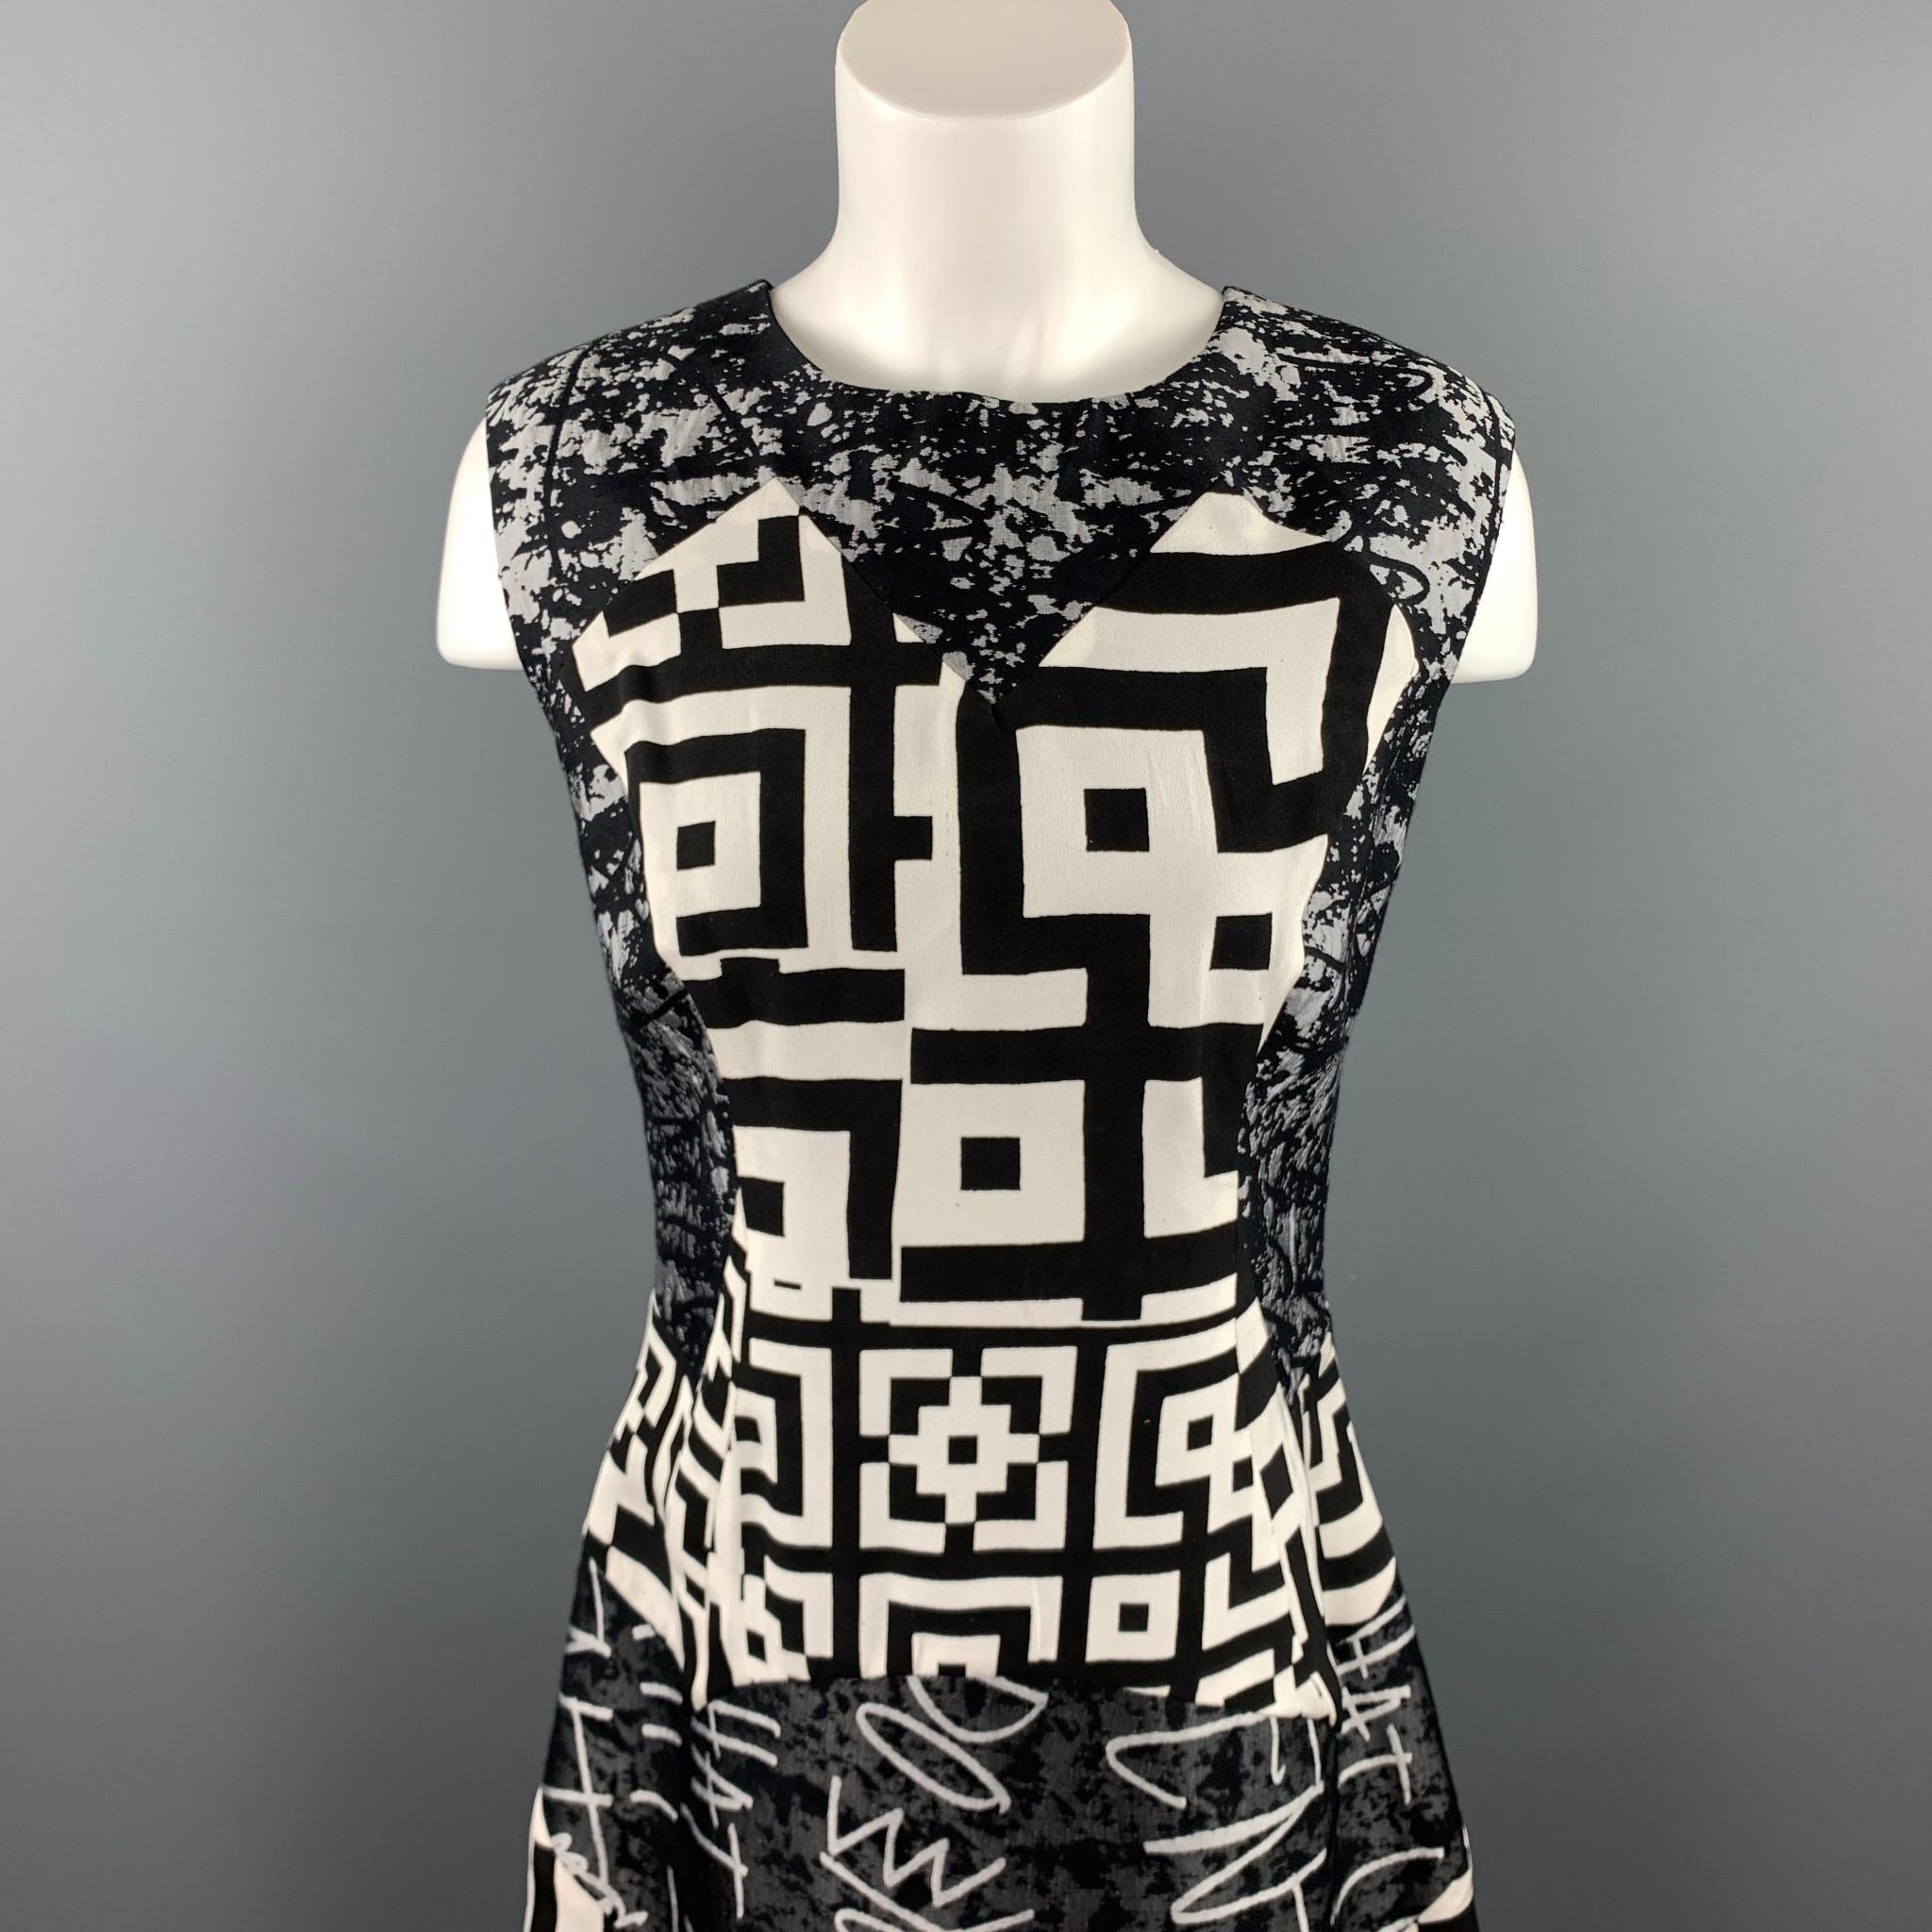 LOUISE GRAY dress comes in a gray wool / silk with an all over graphic print featuring a shift style and a back zip up closure.

Good Pre-Owned Condition.
Marked: 10

Measurements:

Shoulder: 16 in. 
Bust: 34 in. 
Waist: 32 in.
Hip: 40 in. 
Length: